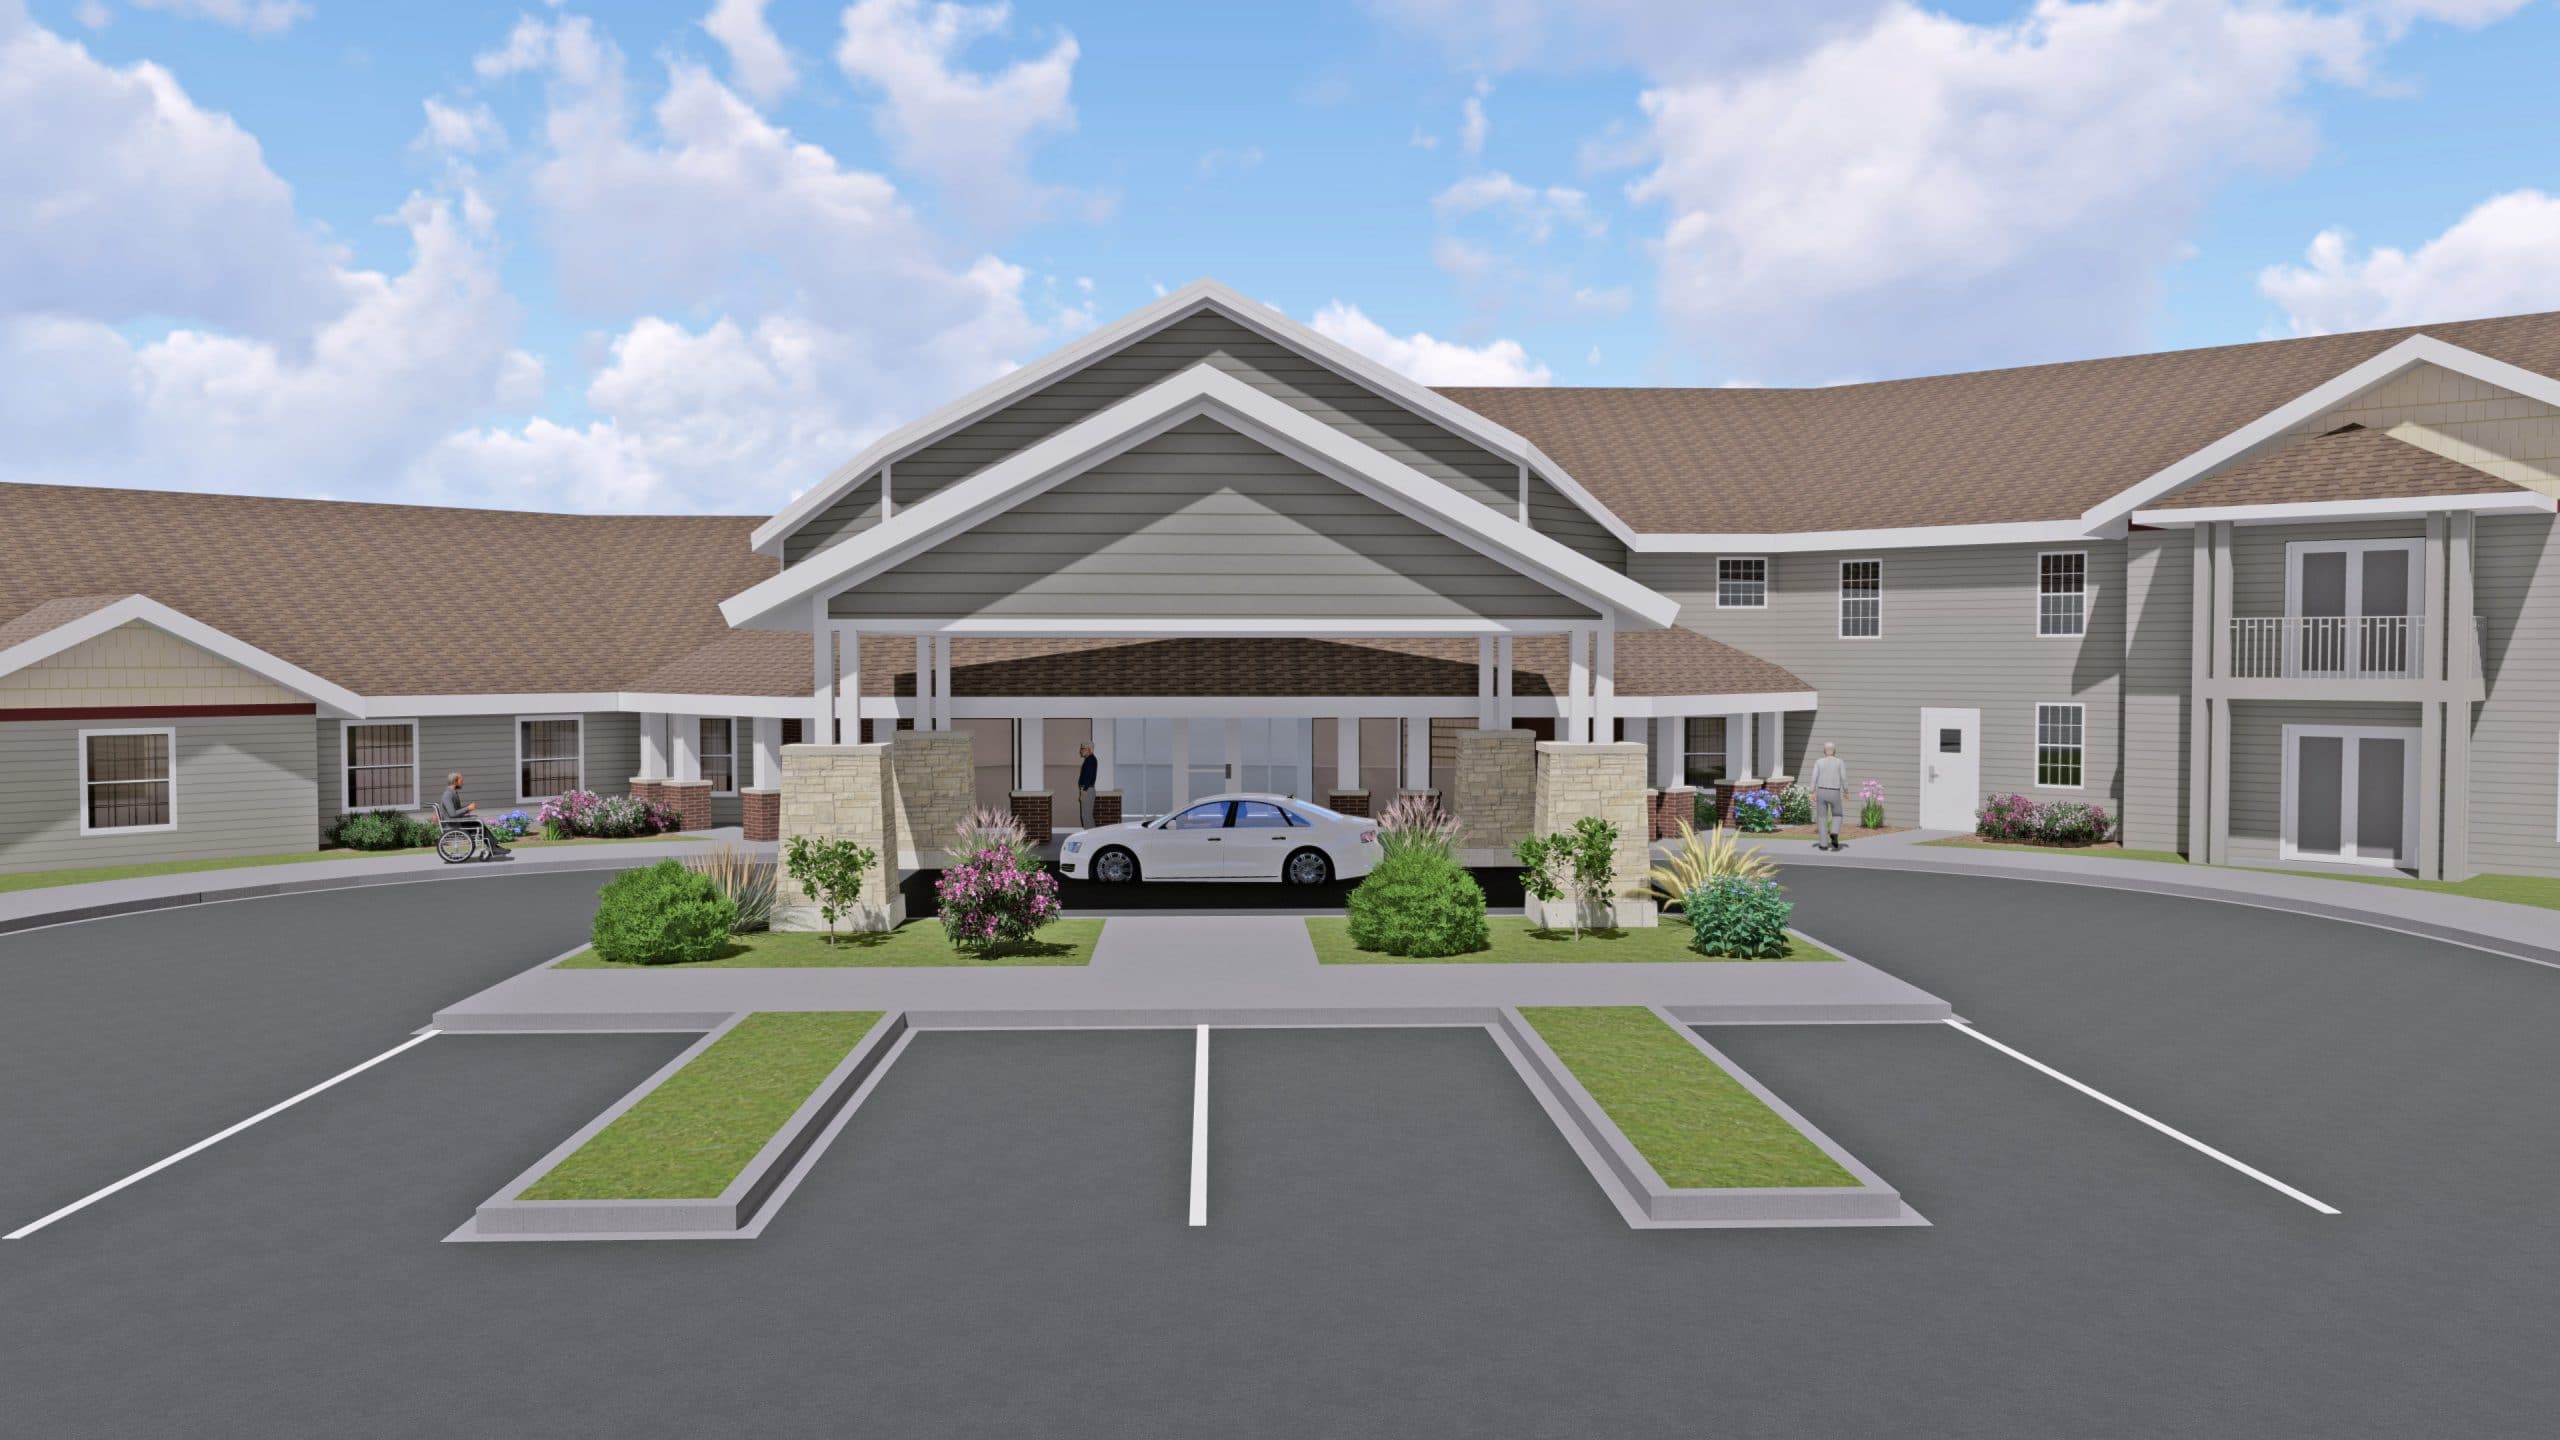 Sioux Center Health On Caring For Its Community - Crown Pointe Main Entrance 2 Scaled